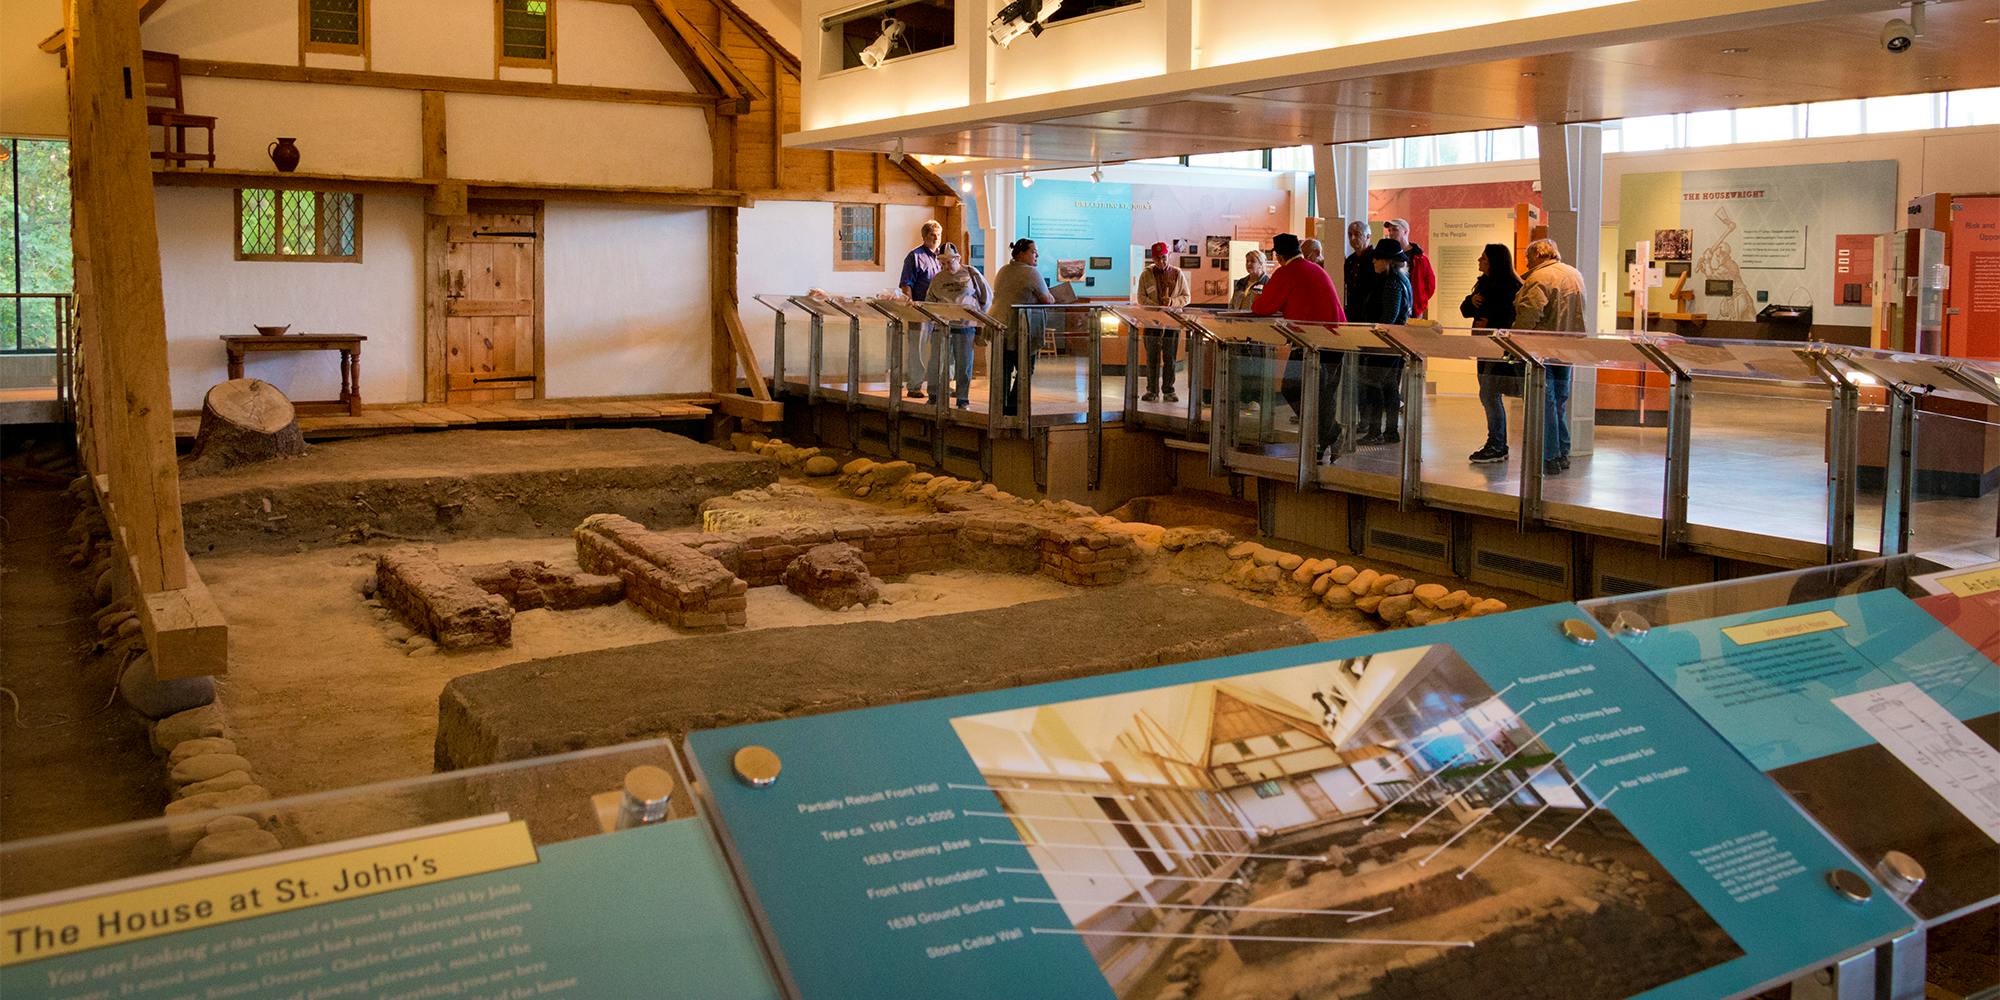 St. John's Site Museum is a premiere museum of archaeology, and rare opportunity to see a partially excavated and preserved site.